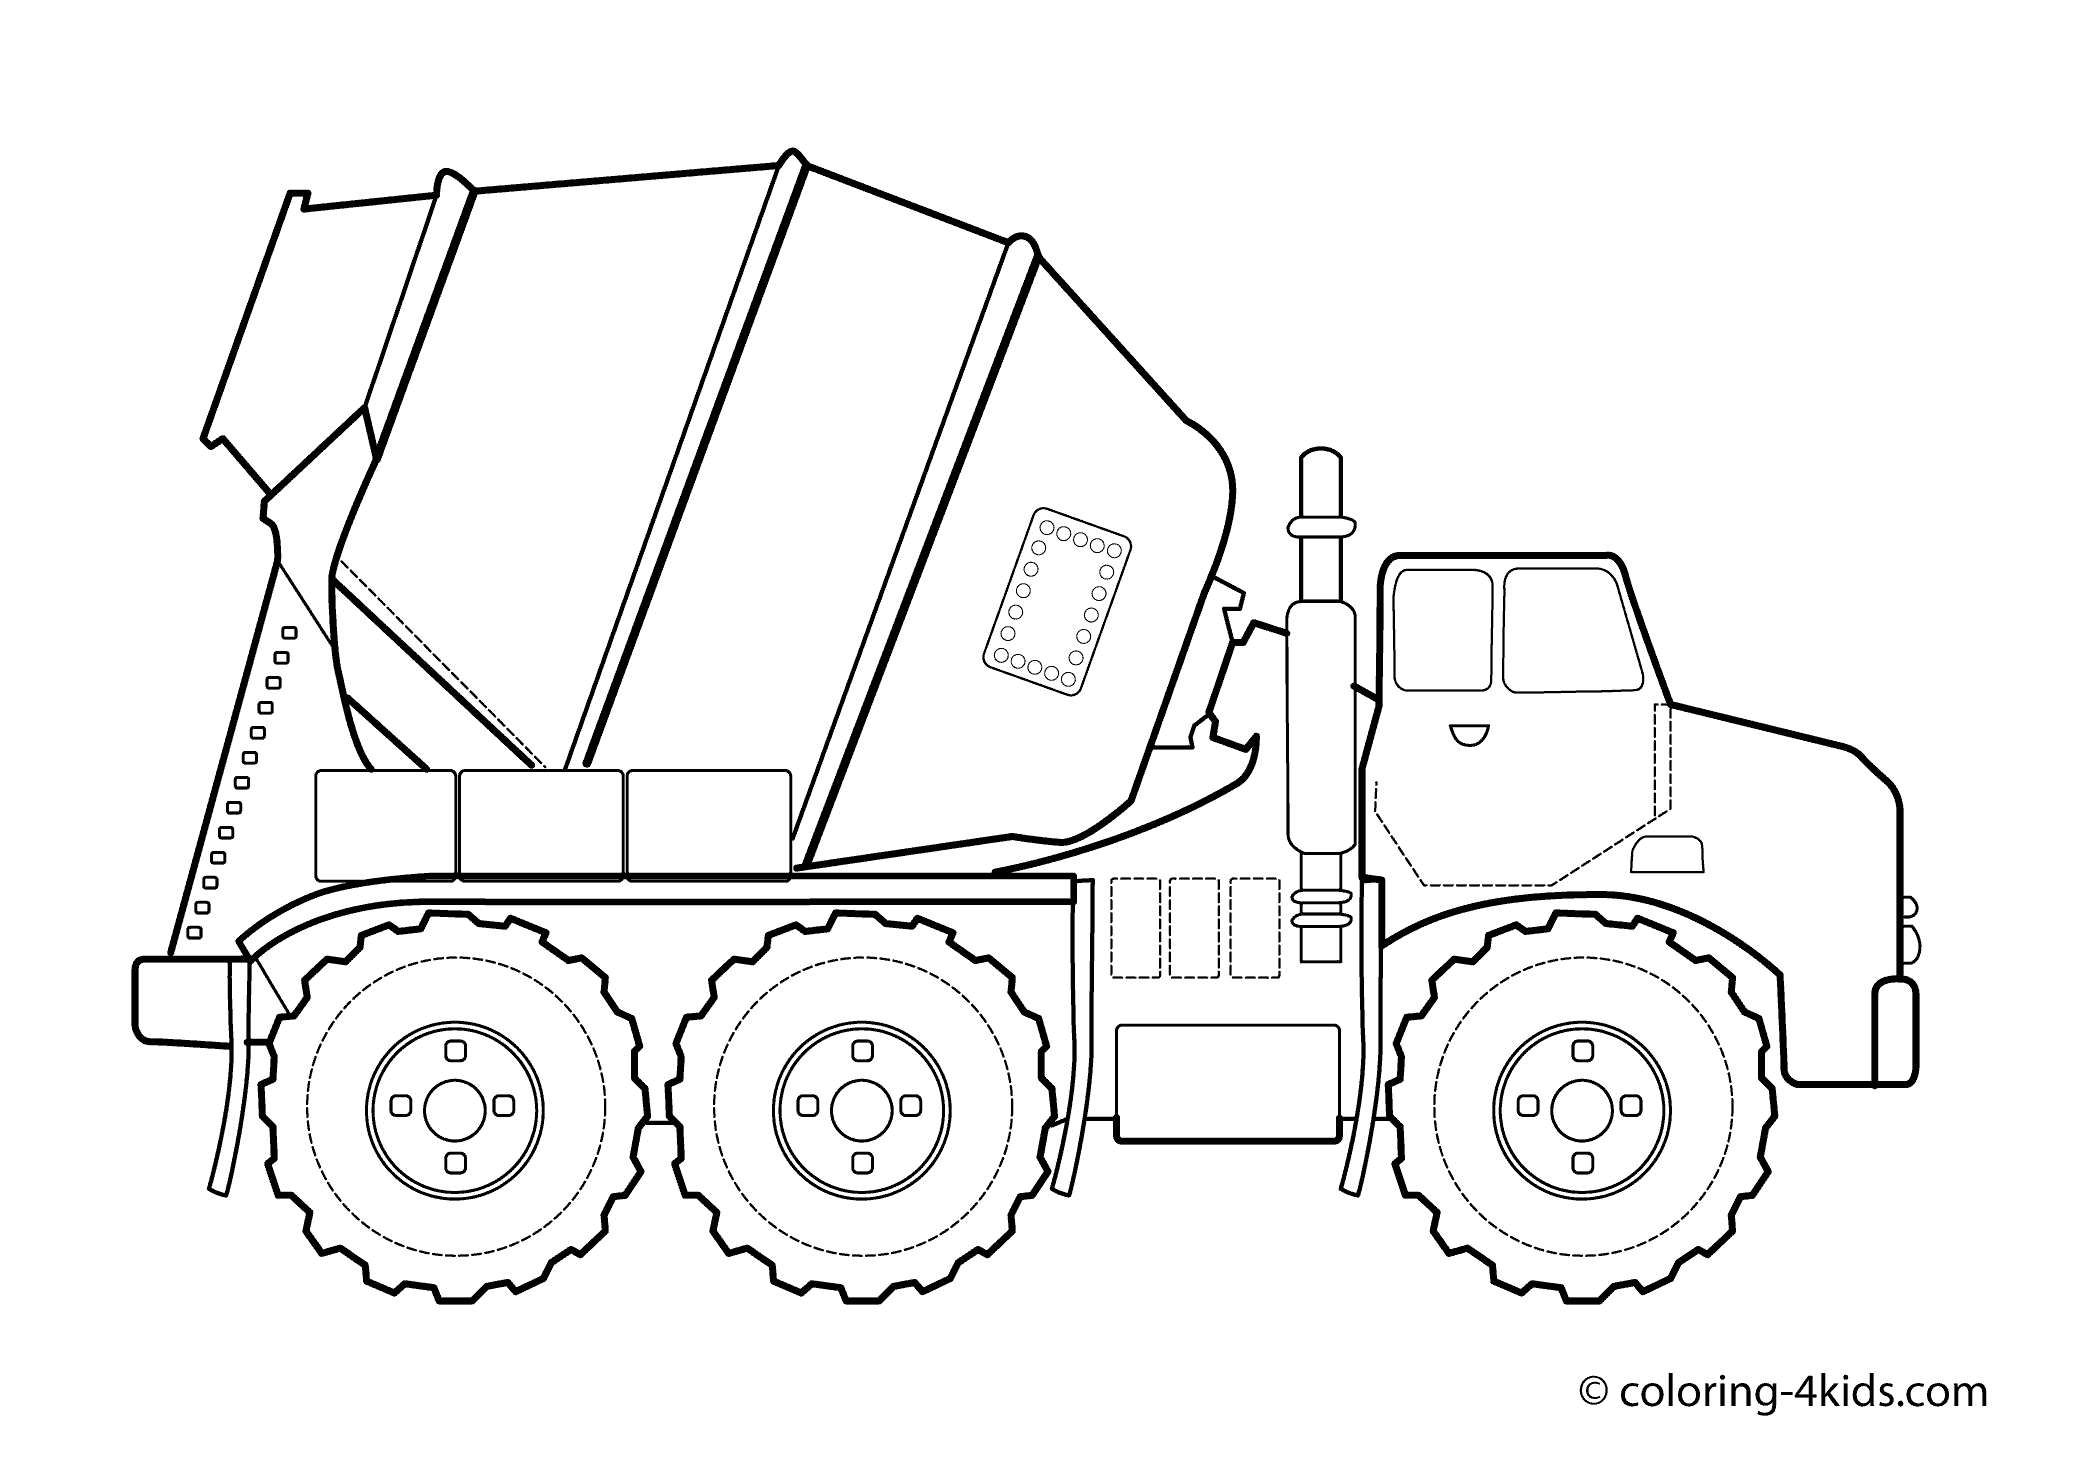 Cement Mixer Coloring Pages To Print - Coloring Pages For All Ages